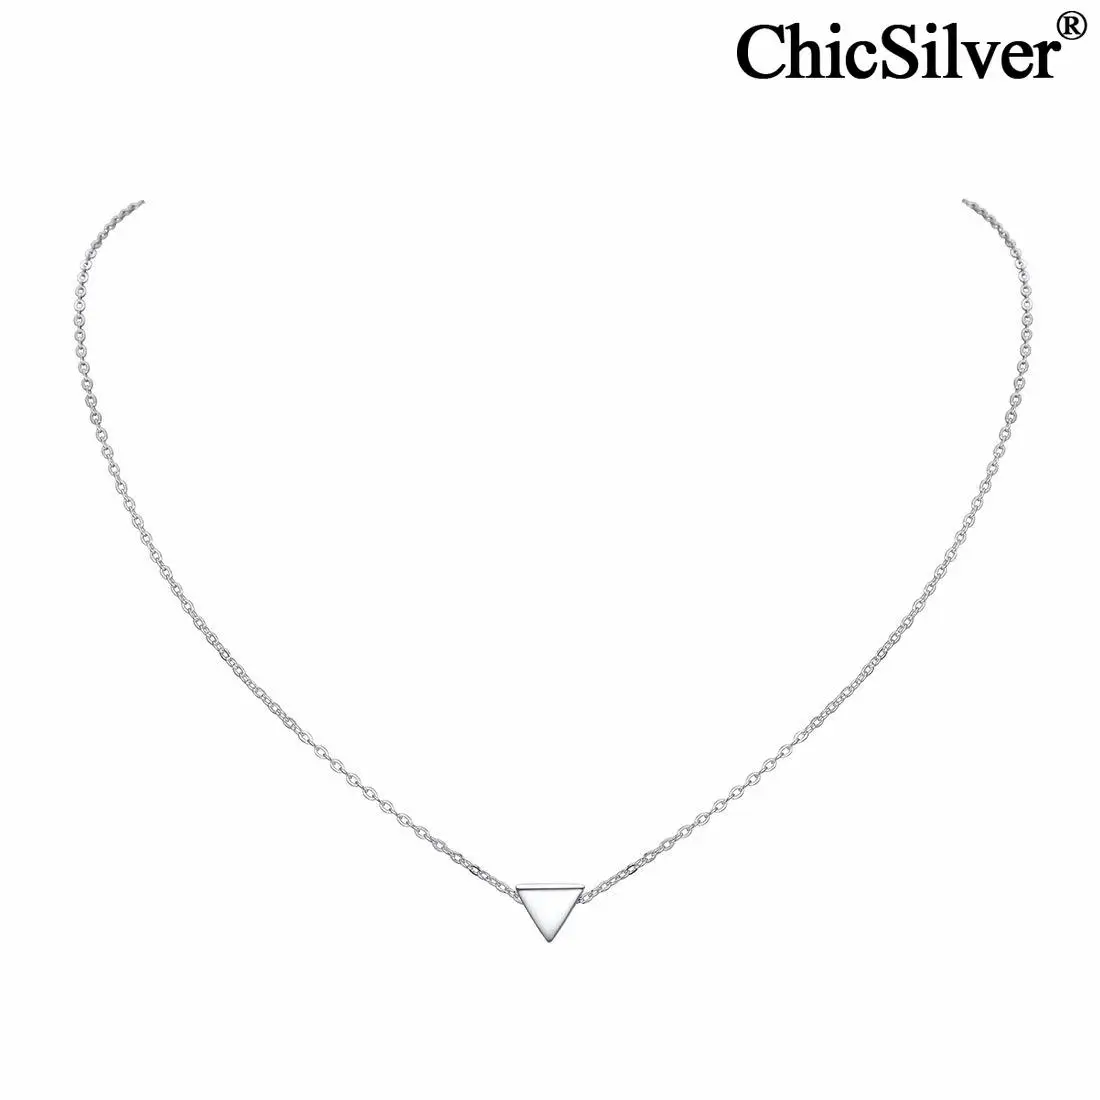 

ChicSilver Geometric Triangle Necklace Hypoallergenic 925 Sterling Silver Delicate Simple Tiny Cute Pendant Necklace for Women